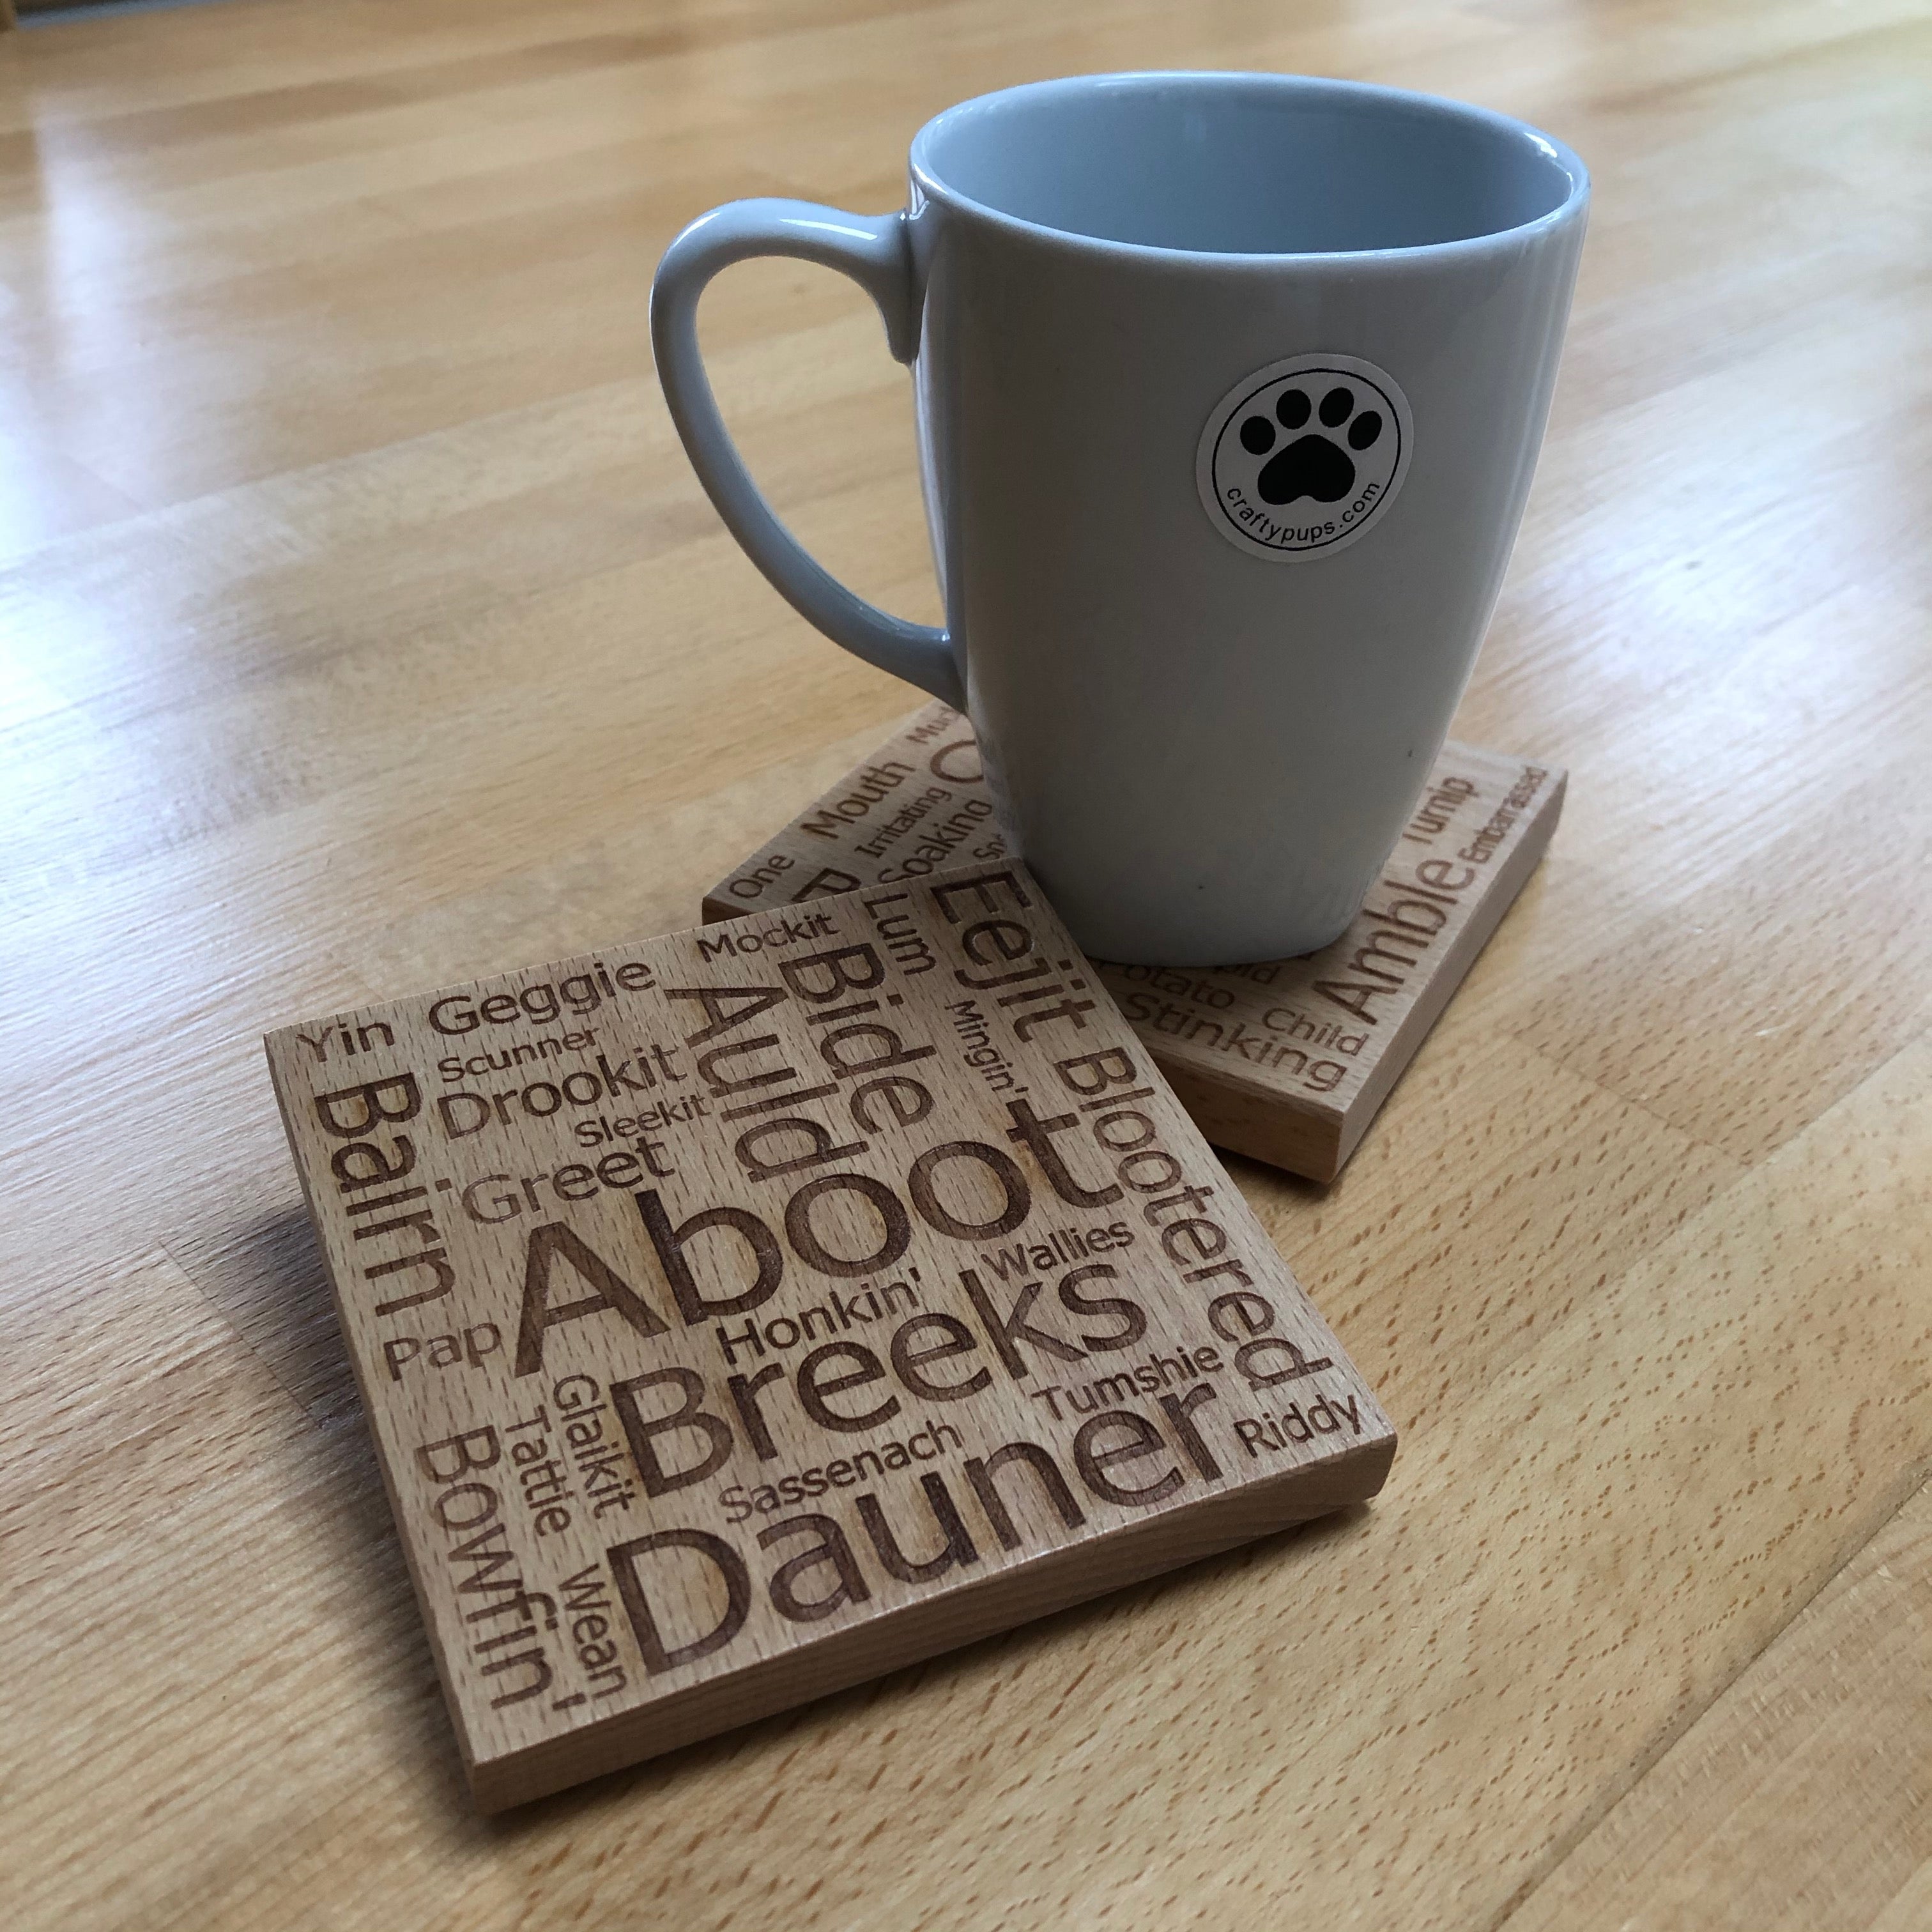 Wooden coasters - Scottish dialect with English translations - set of 4